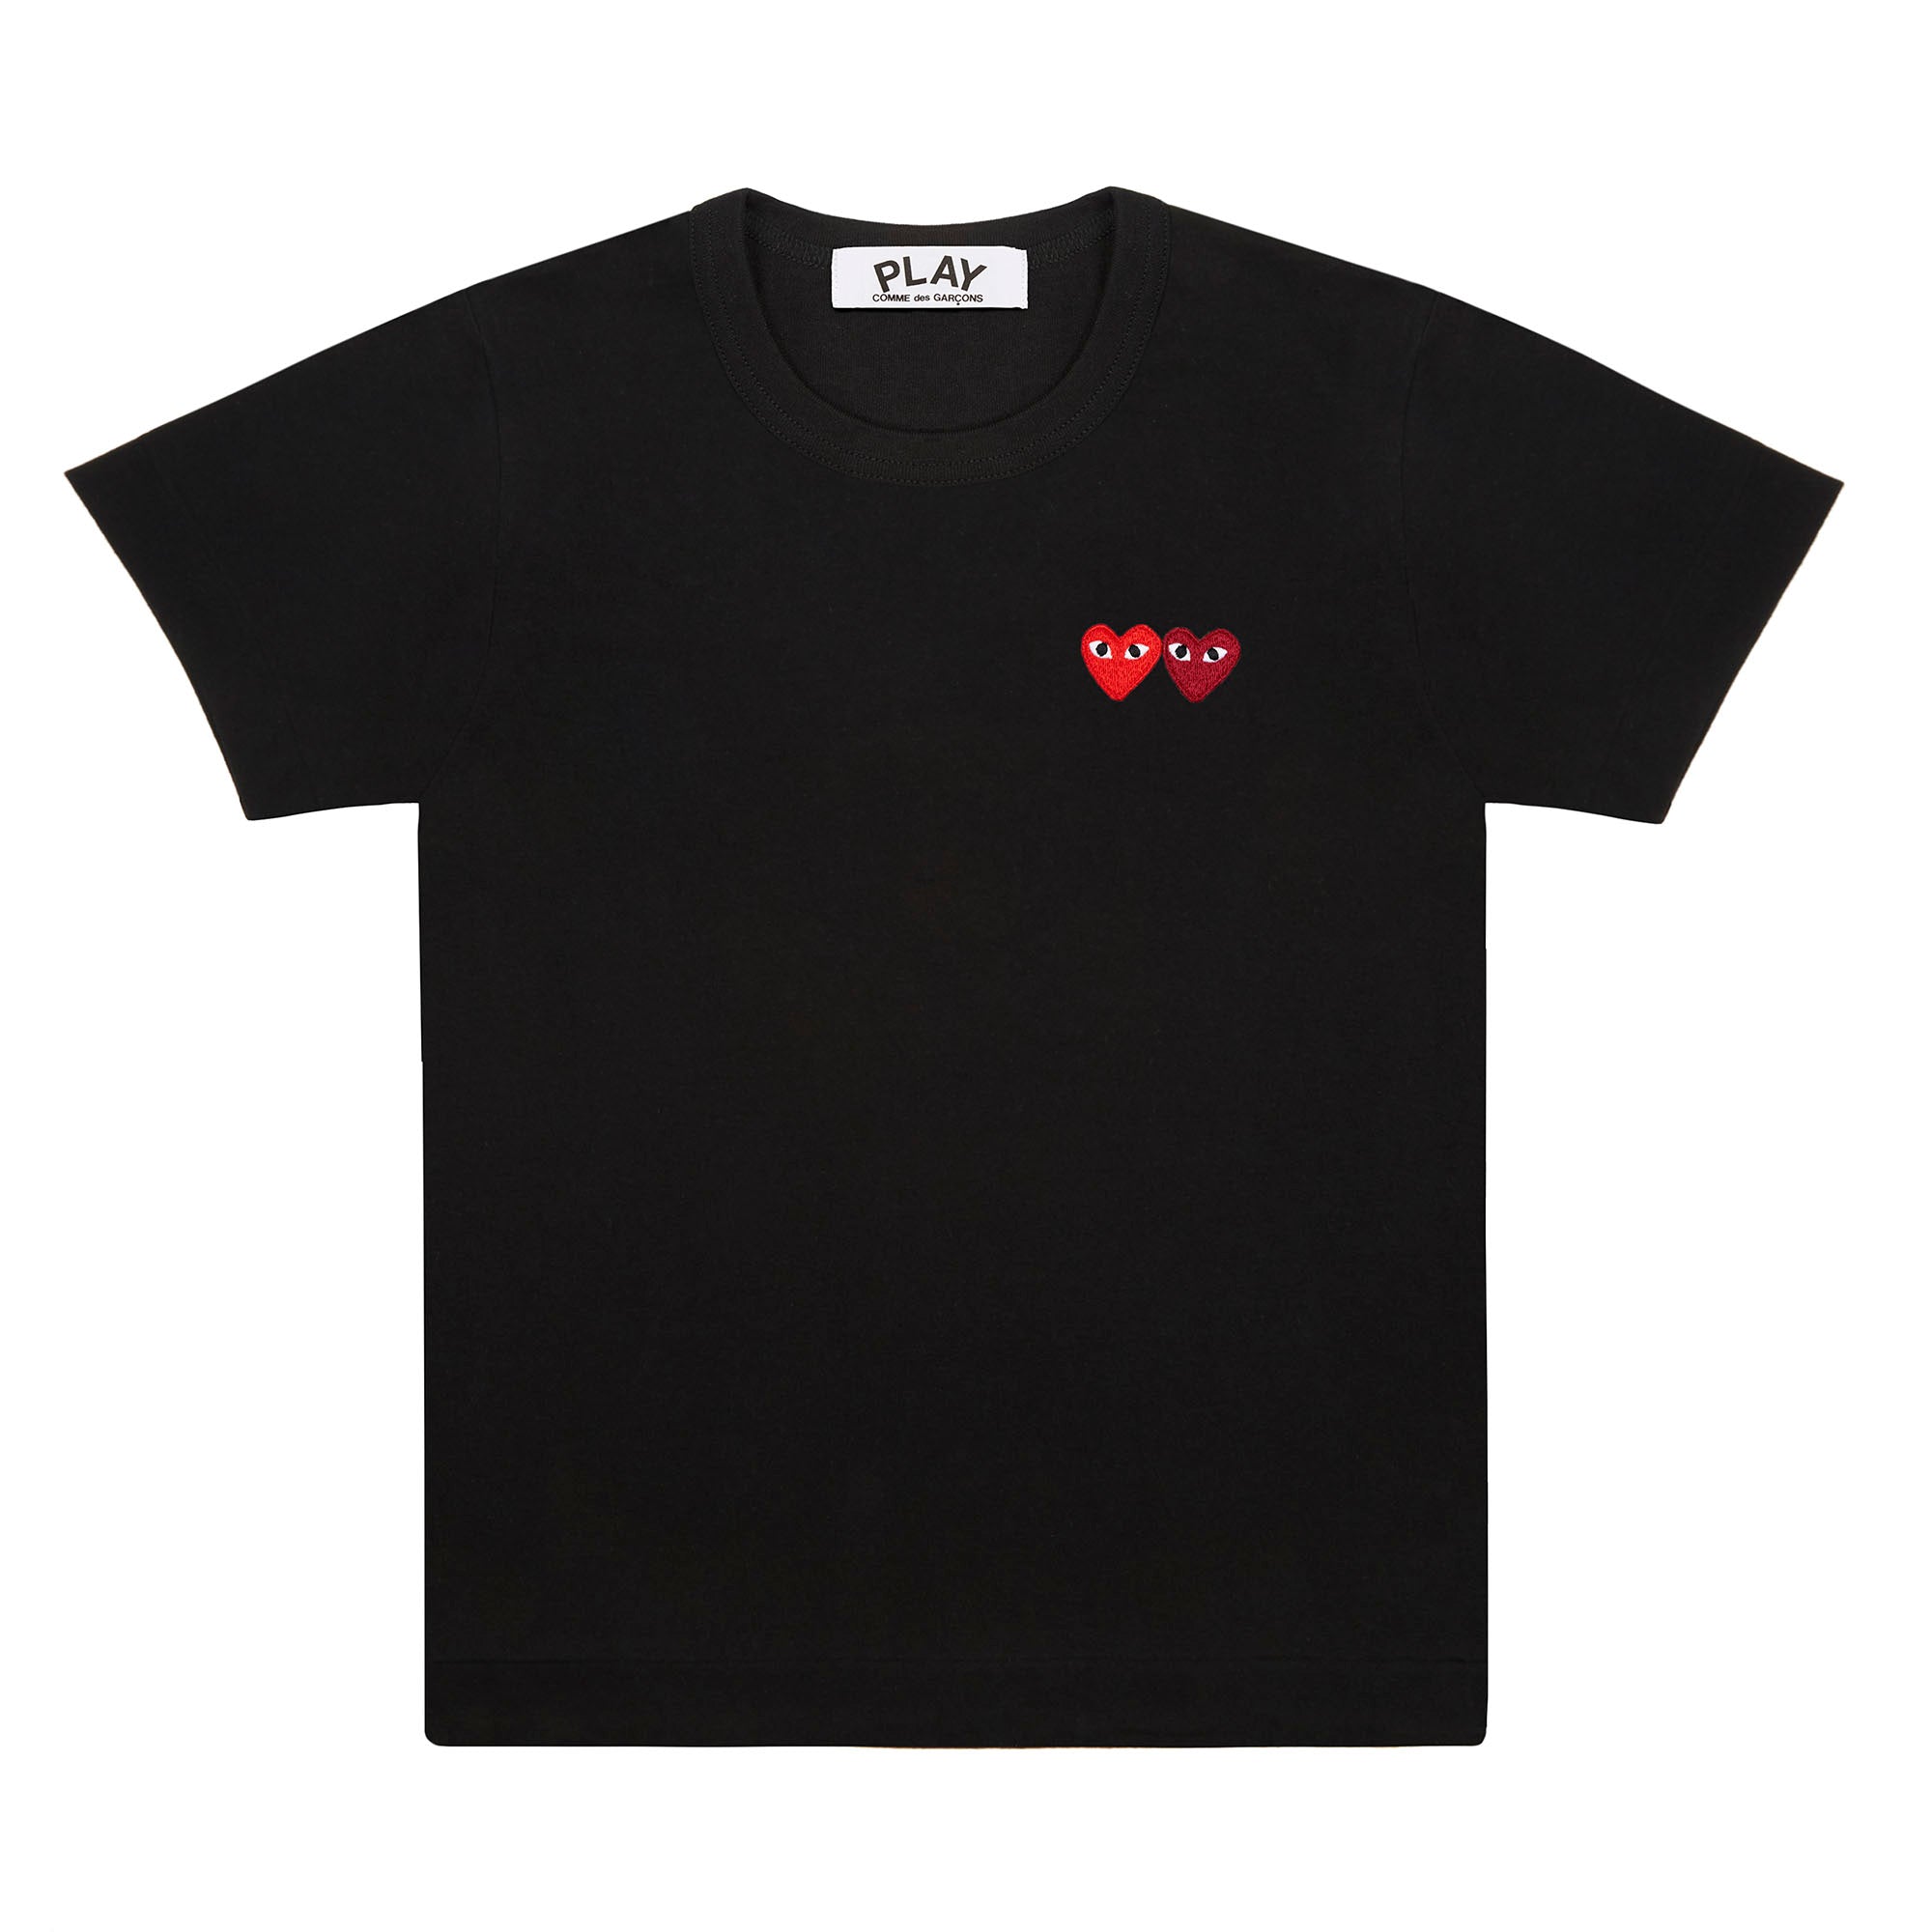 Play - T-Shirt with Double Heart - (Black) view 1